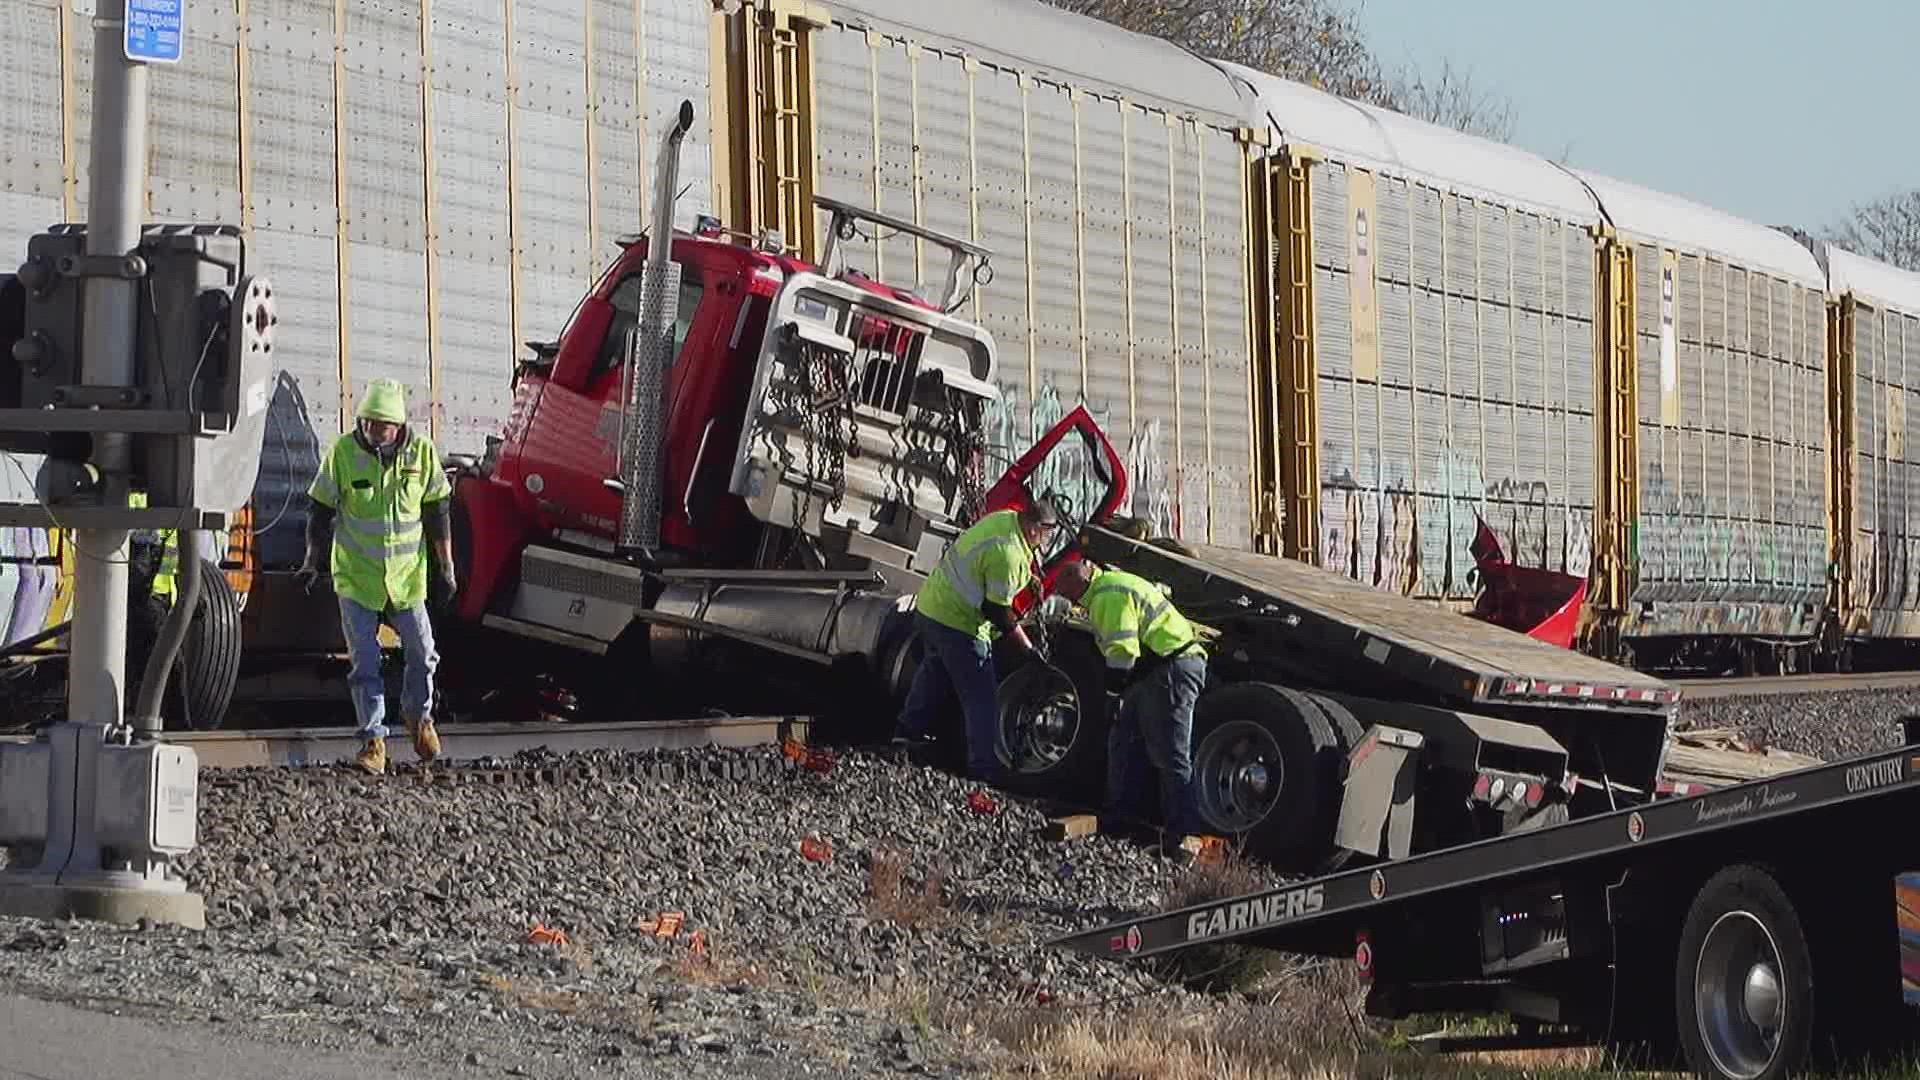 The driver saw a train coming and got out before the semi was hit.